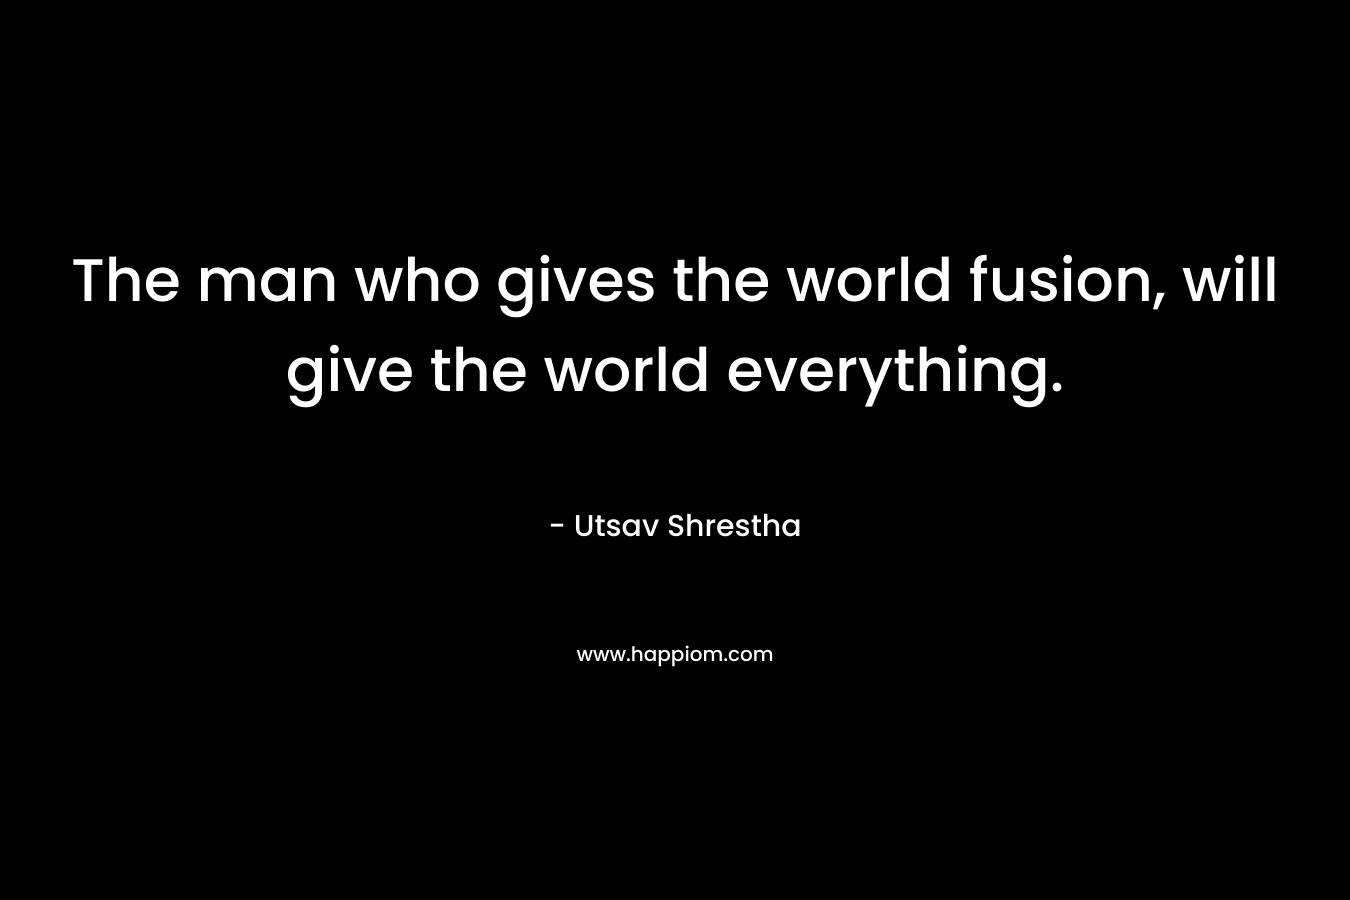 The man who gives the world fusion, will give the world everything.